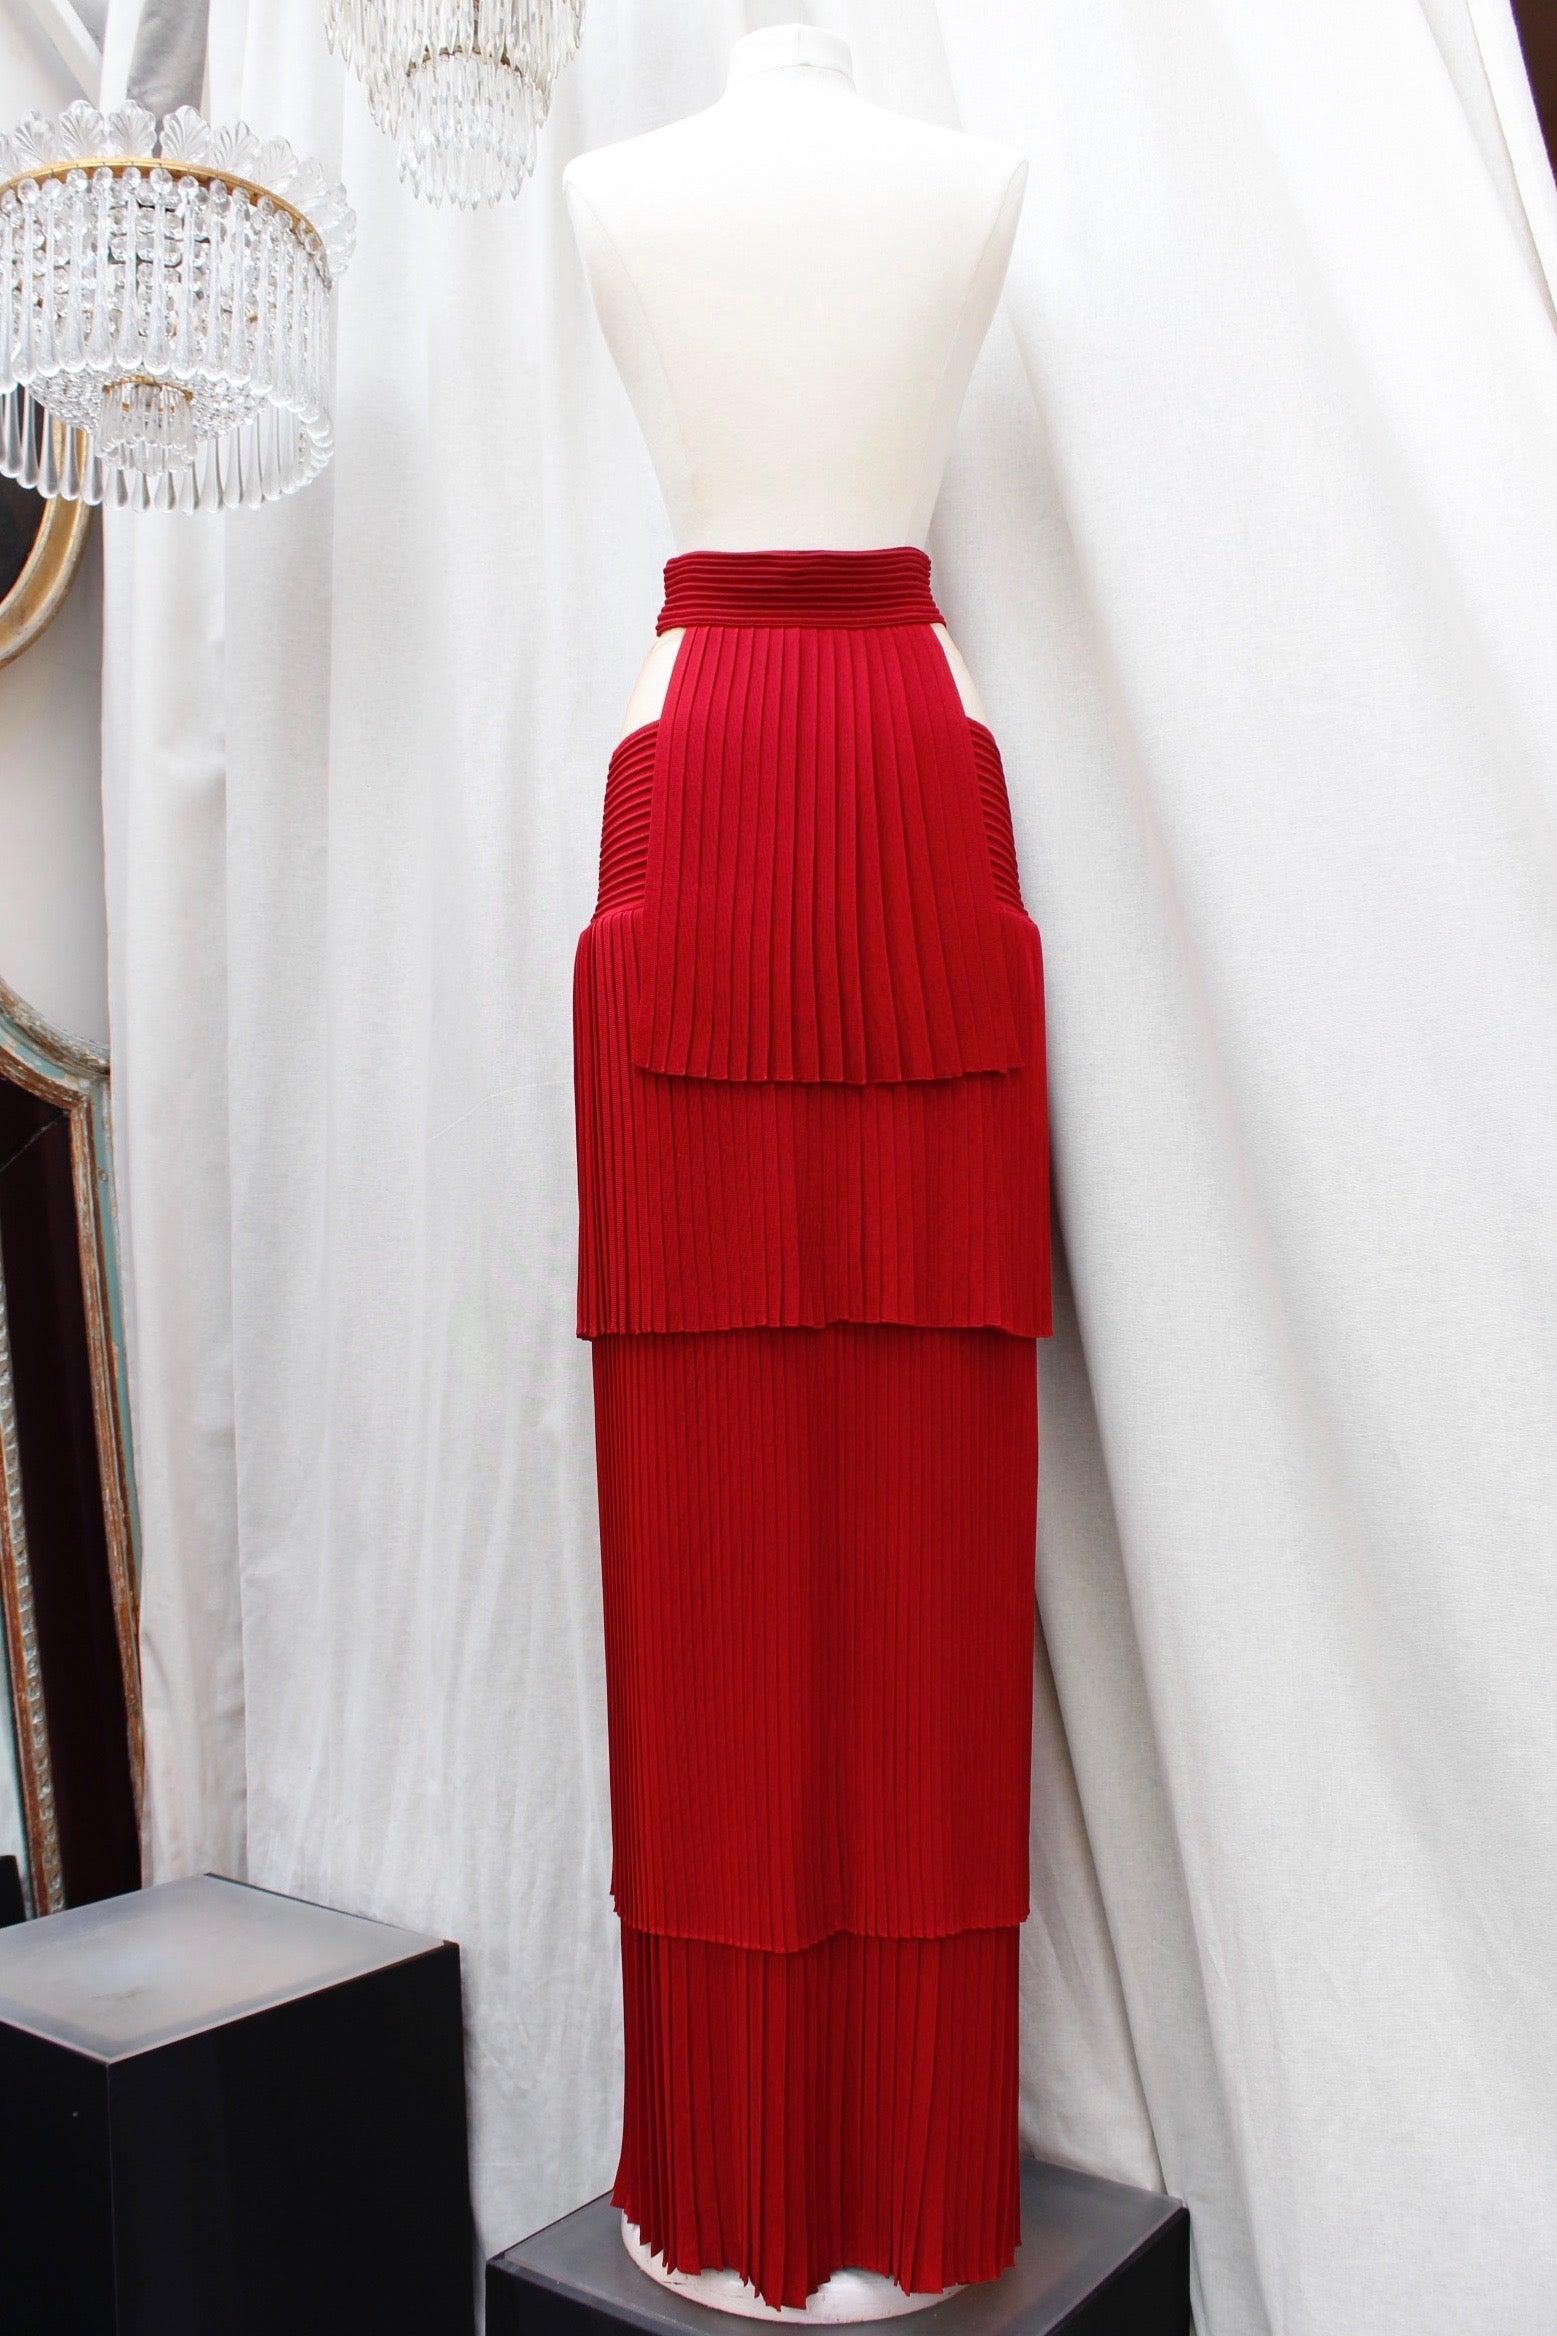 Balmain Red Pleated Skirt with Nude Mesh In Excellent Condition For Sale In SAINT-OUEN-SUR-SEINE, FR